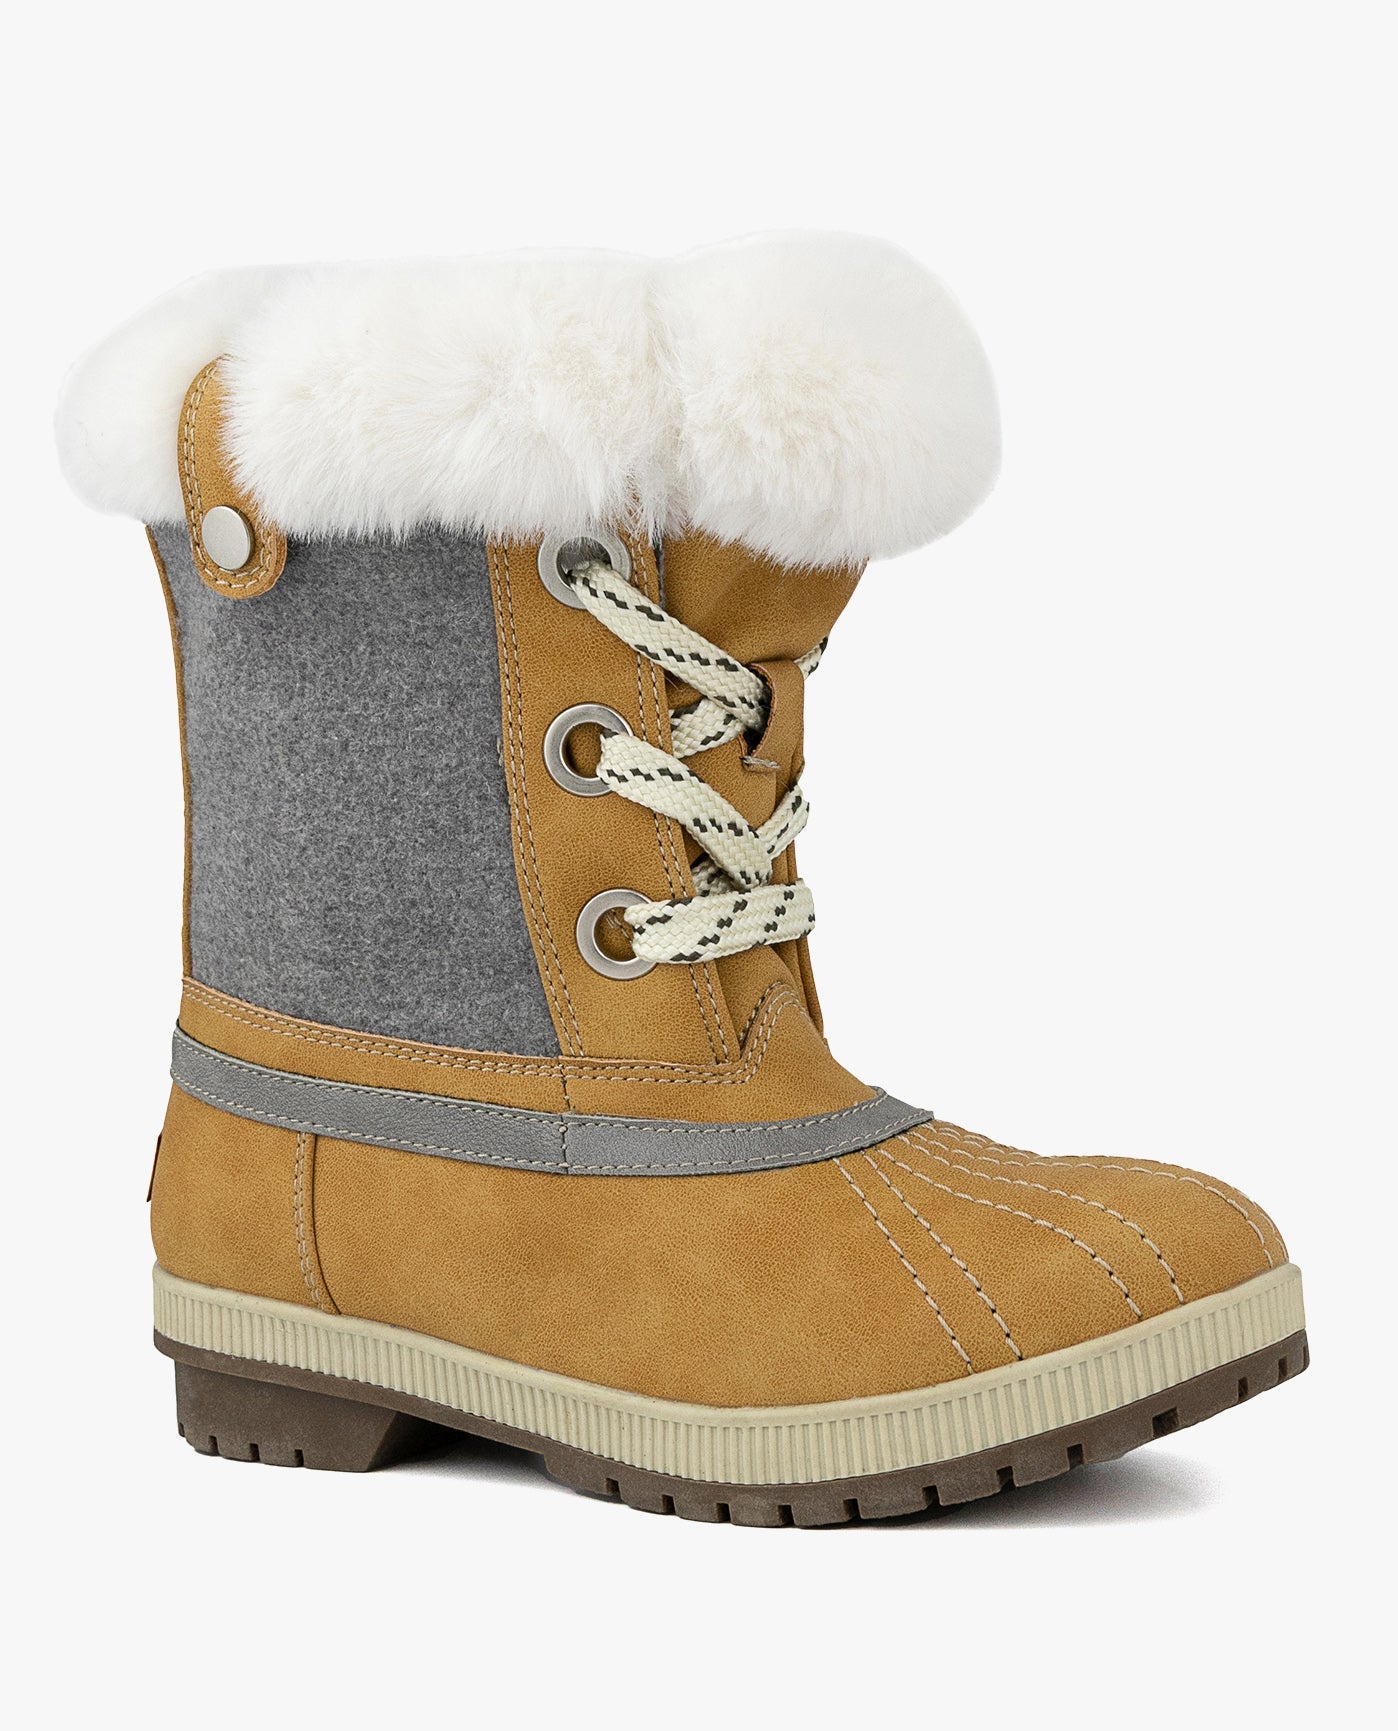 MAIN IMAGE OF WOMENS MILLY WINTER BOOT | ESO_HONEY GREY_251